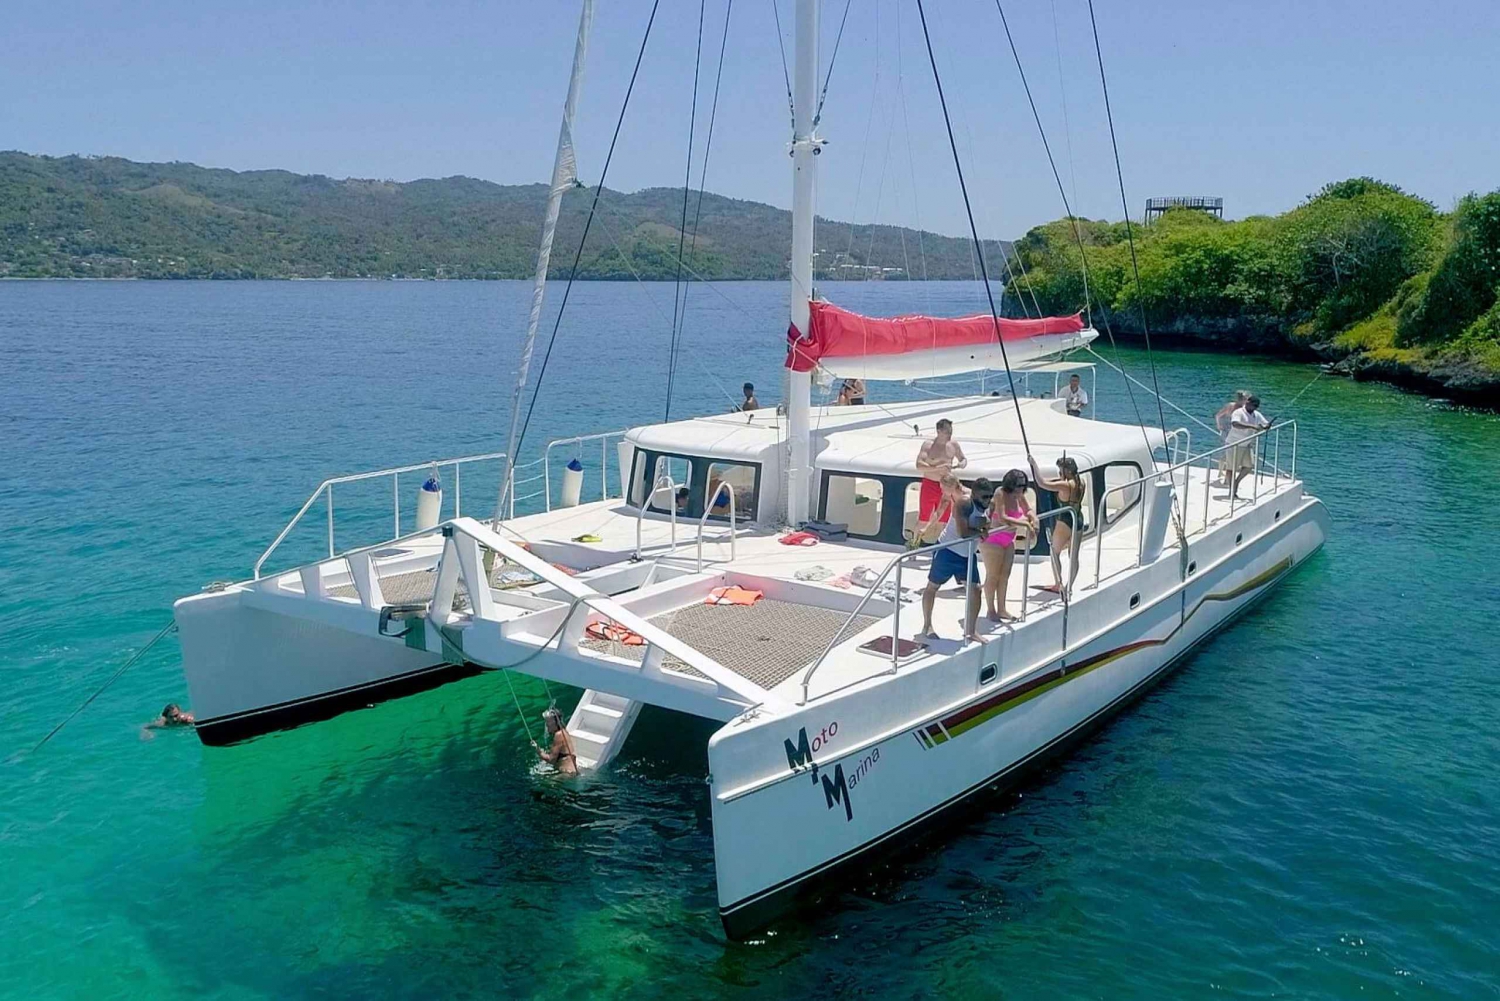 Samaná: Catamaran Boat Tour with Snorkeling and Lunch